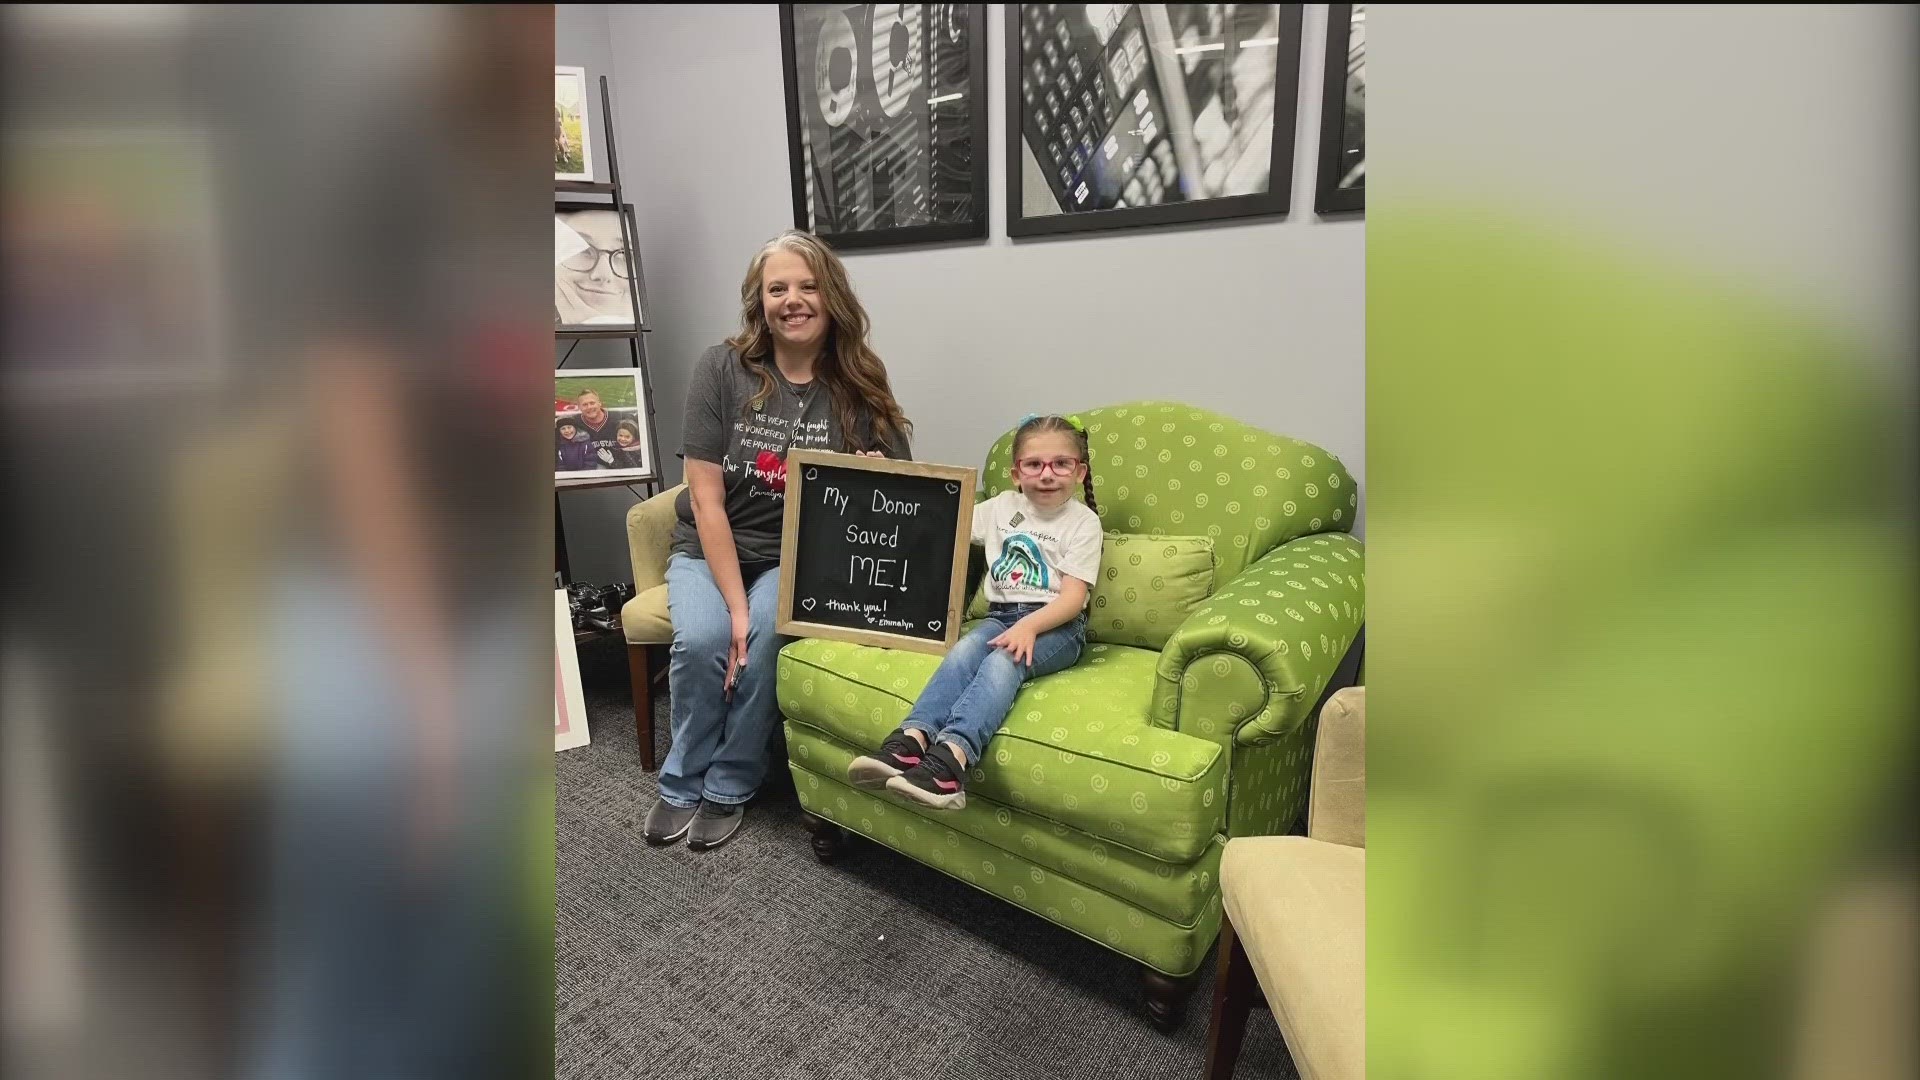 WTOL 11 and Life Connection of Ohio partnered for the 14th annual 24-hour Green Chair Donate Life Sit-in April 16-17 to mark National Donate Life Month.